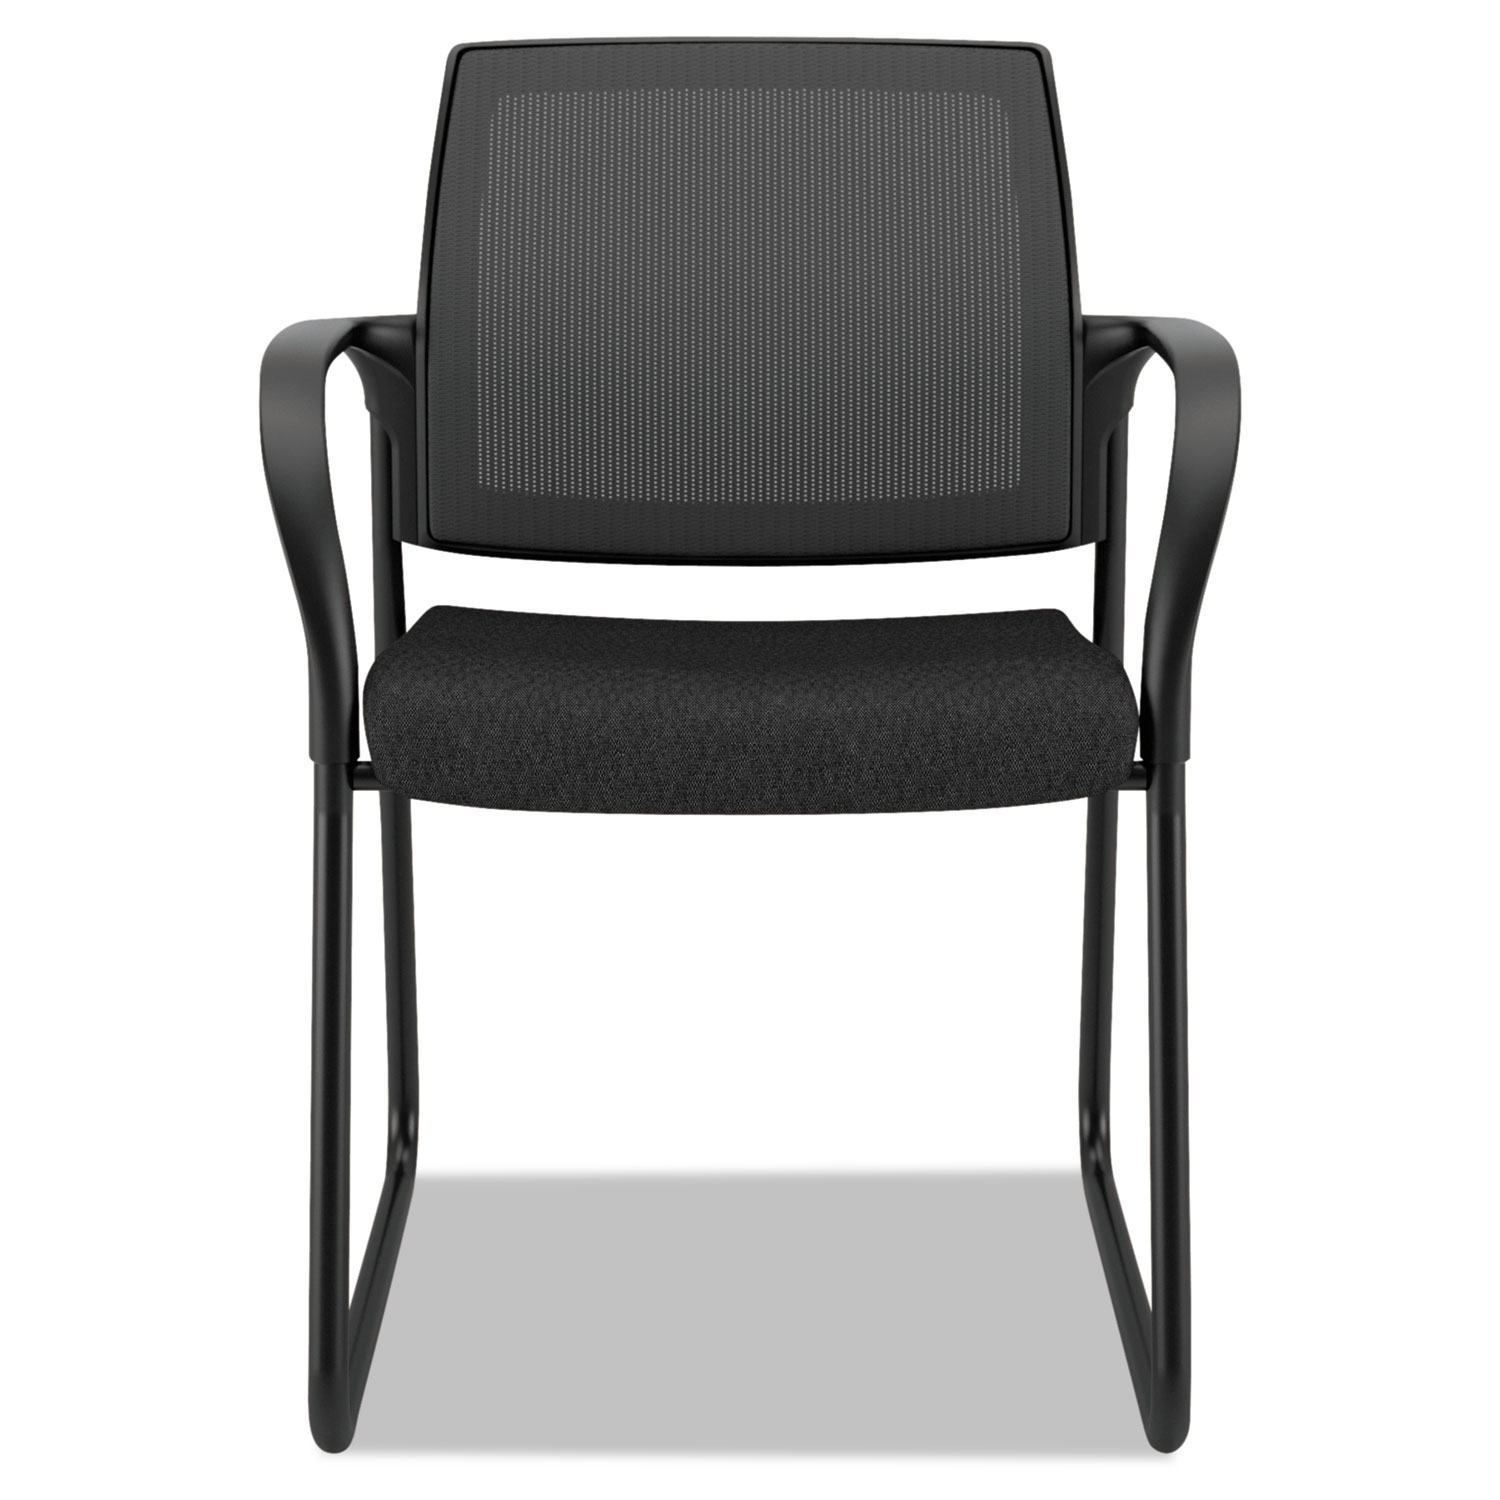 Ignition Series Mesh Back Guest Chair with Sled Base,Black Fabric Upholstery